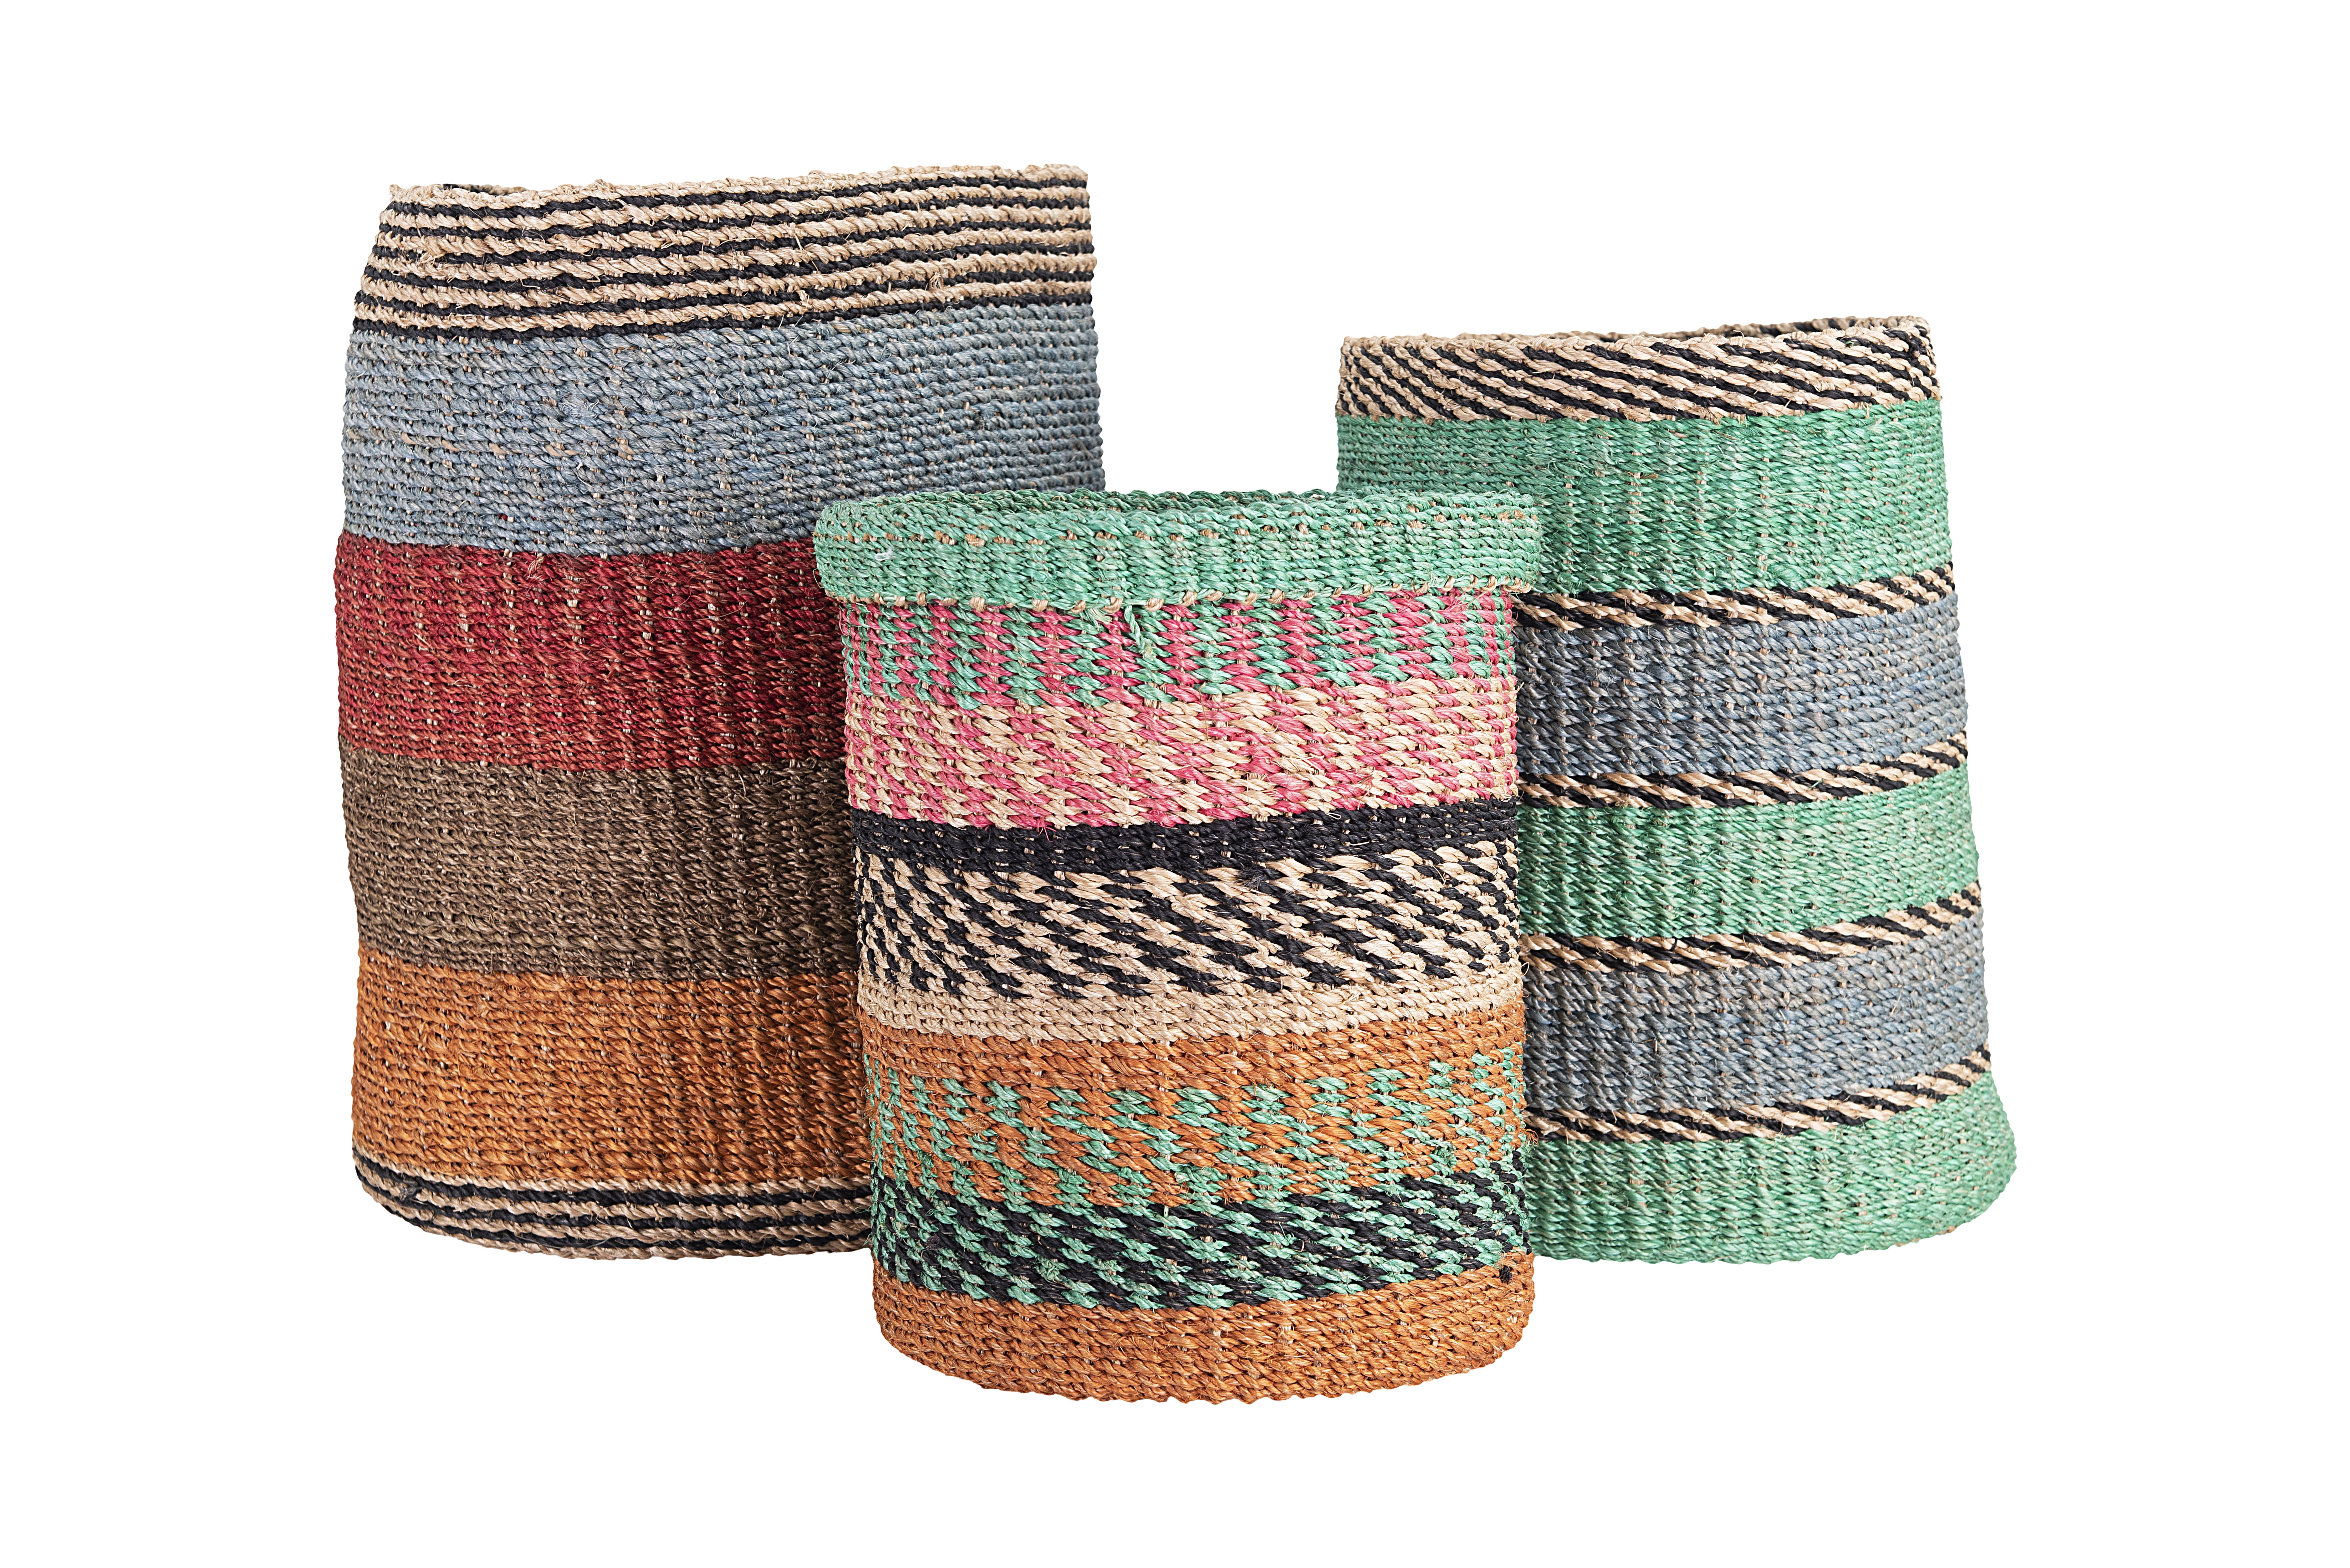 Bright Stripes Hand Woven Abaca Baskets, Set of 3 - Nomad Home